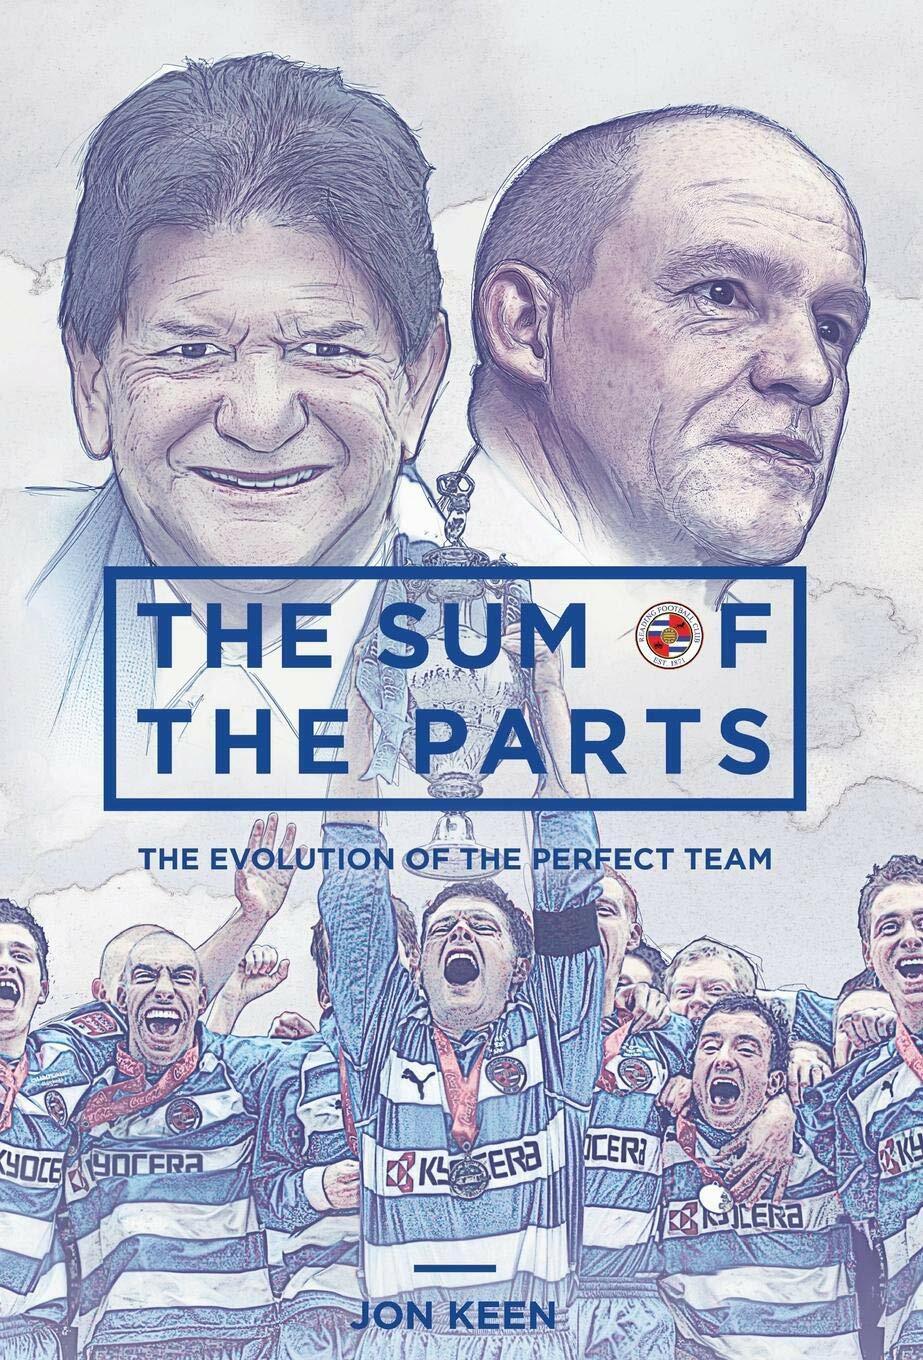 The Sum of the Parts - Jon Keen - Mickle Press, 2016